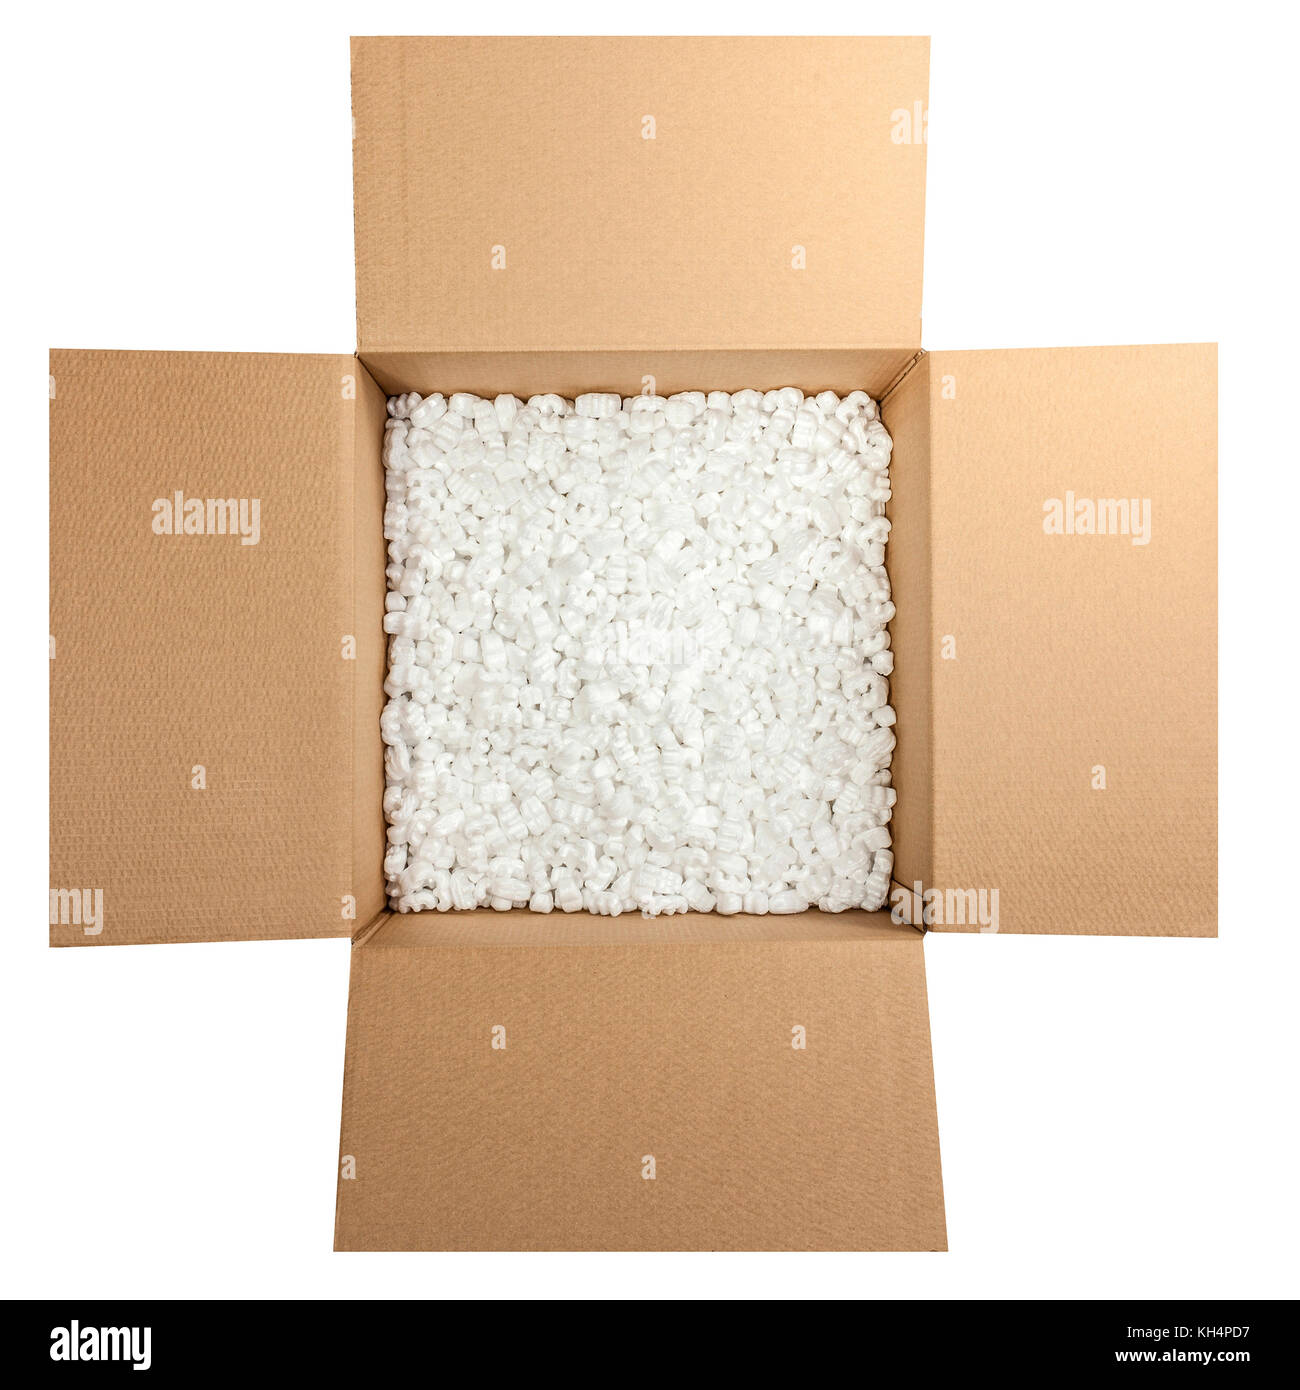 box packaging with polystyrene peanuts inside Stock Photo